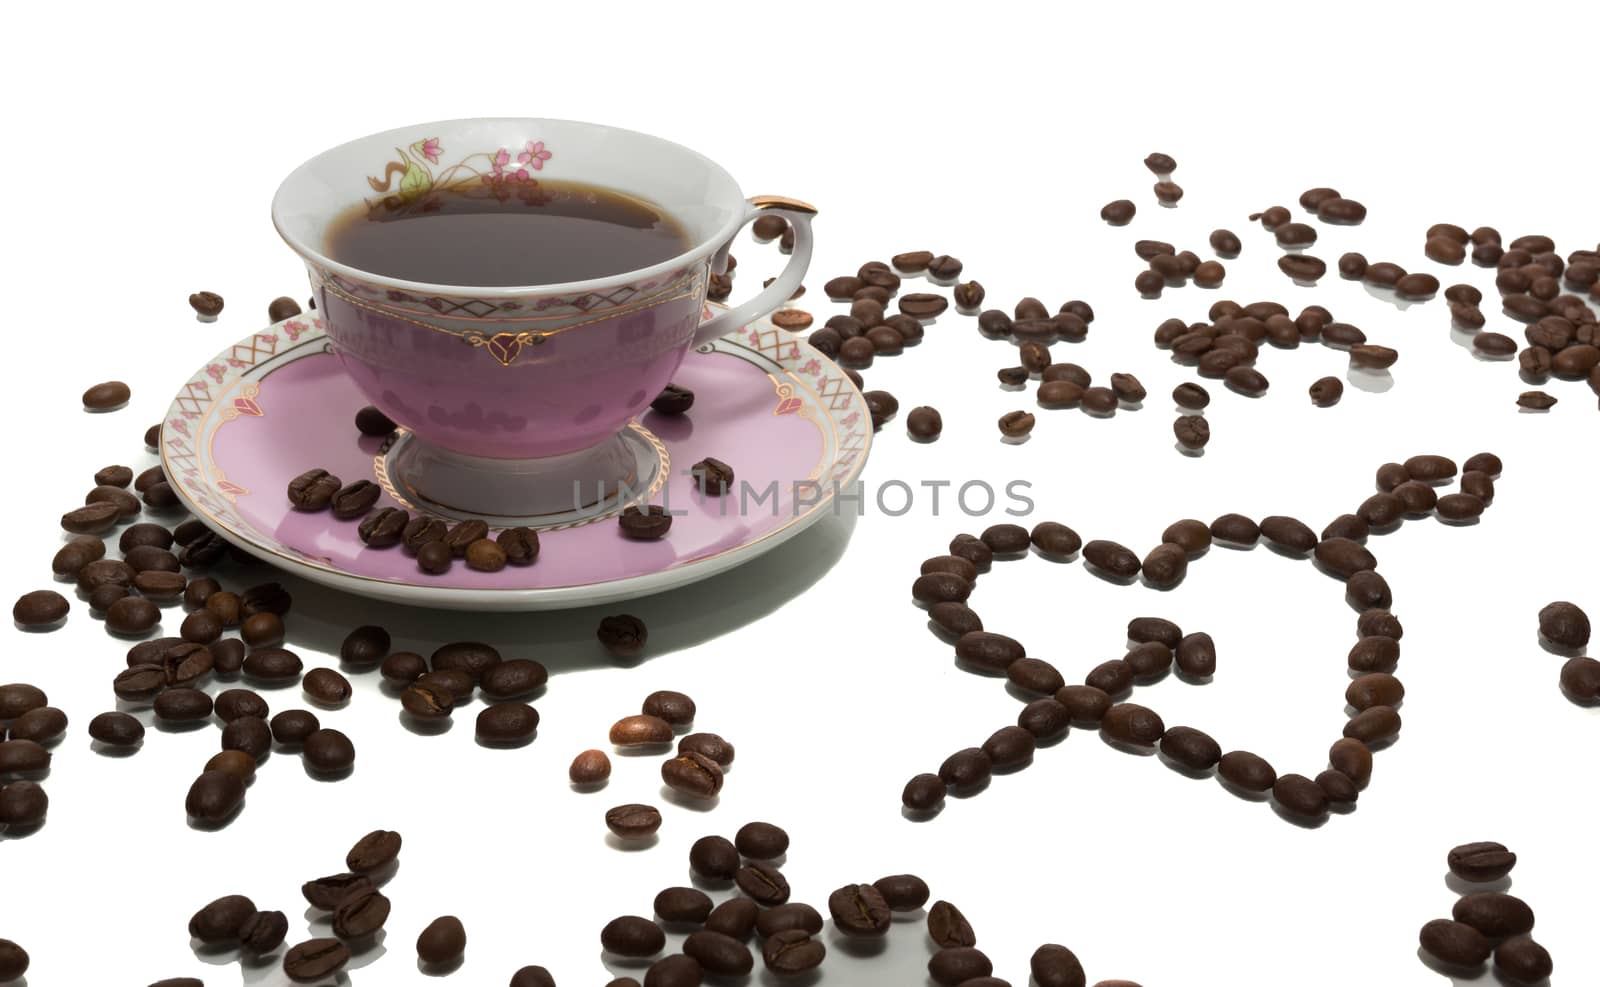 The photograph shows a coffee on a white background